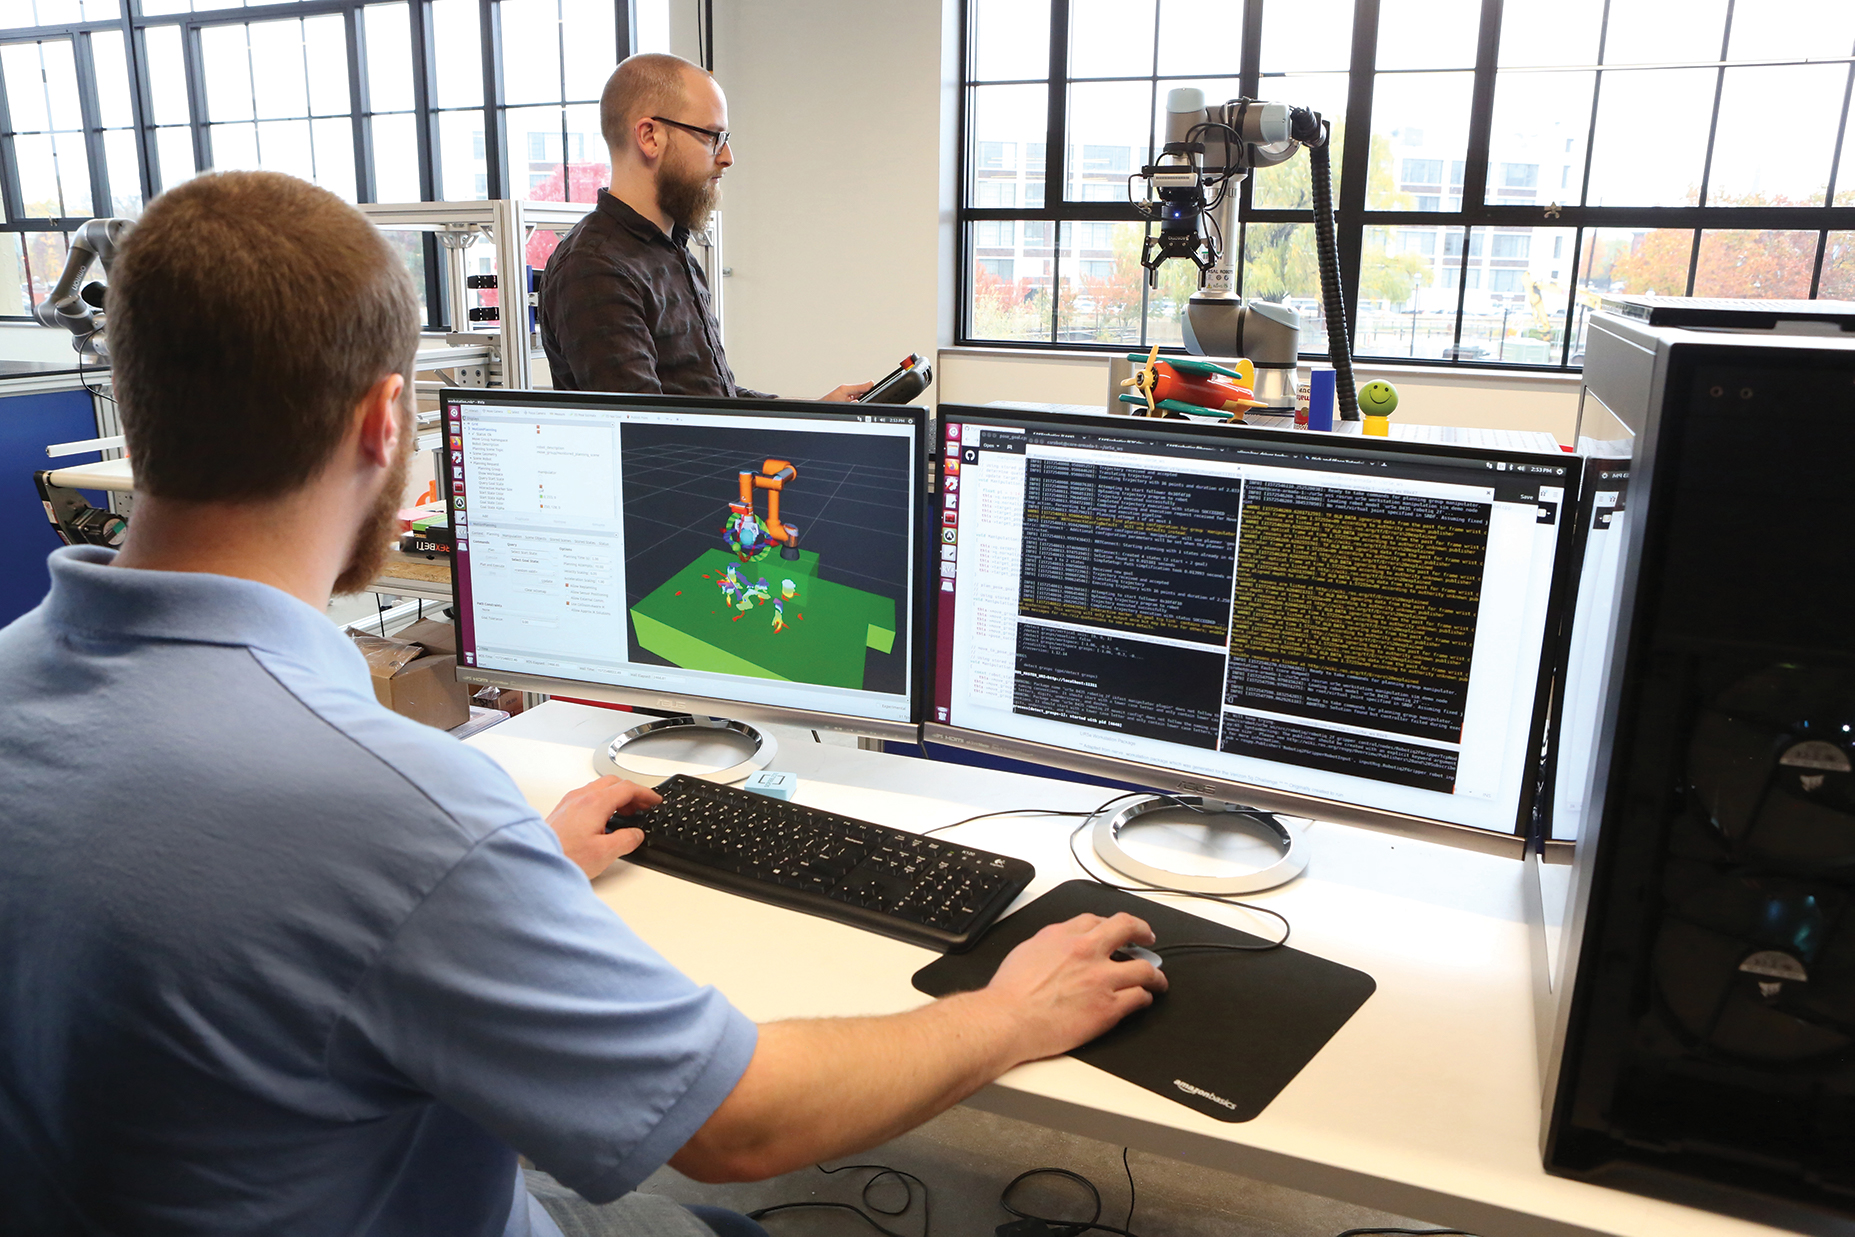 UMass Lowell researchers use the NERVE Center’s ARMada testbed to develop metrics for evaluating robots’ grip strength, object manipulation, parts assembly, and human interaction.